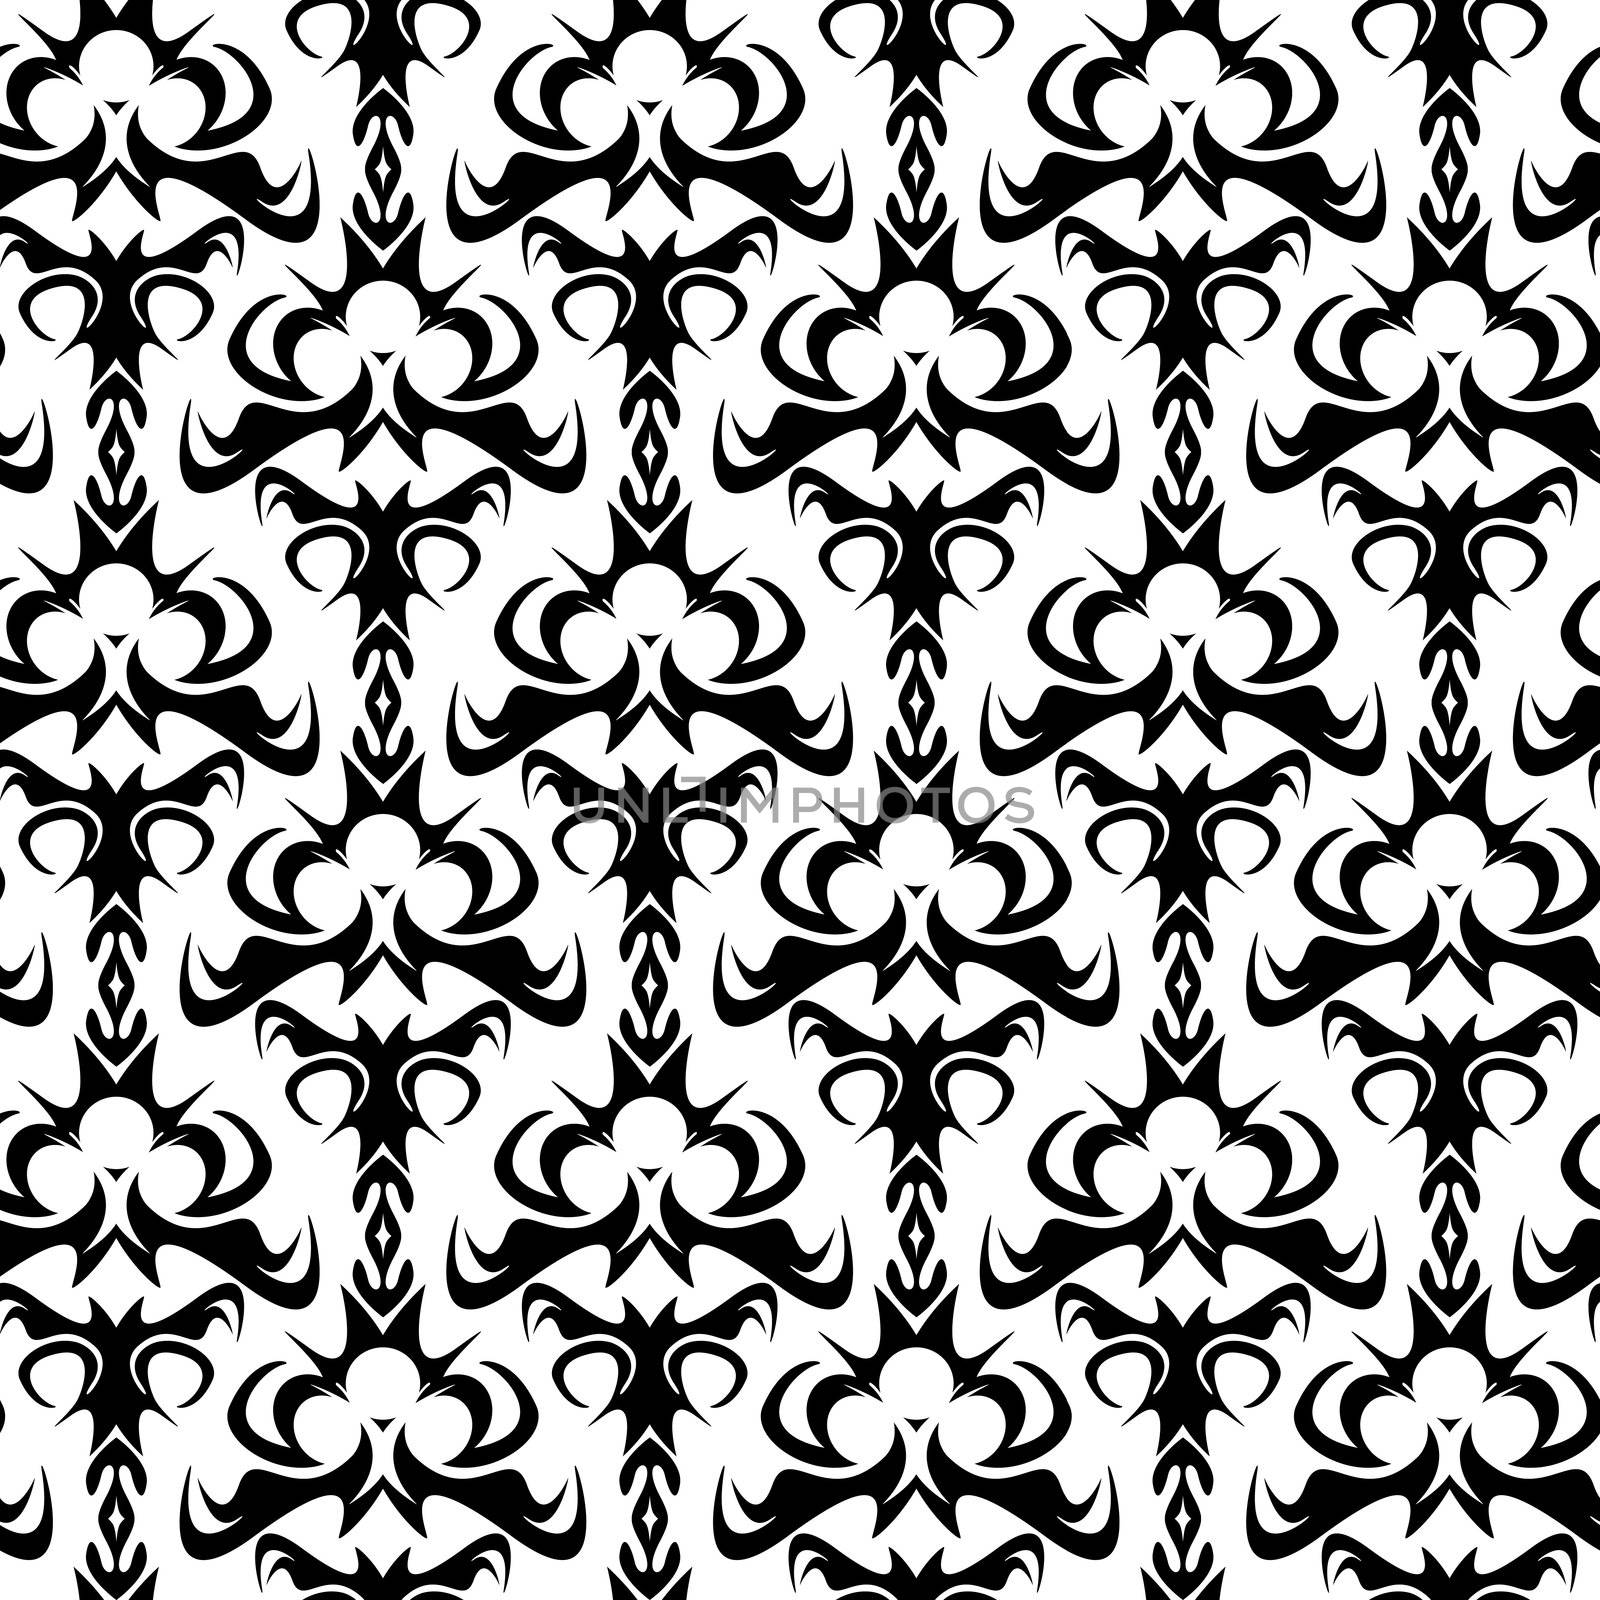 A seamless damask pattern or texture in vector format